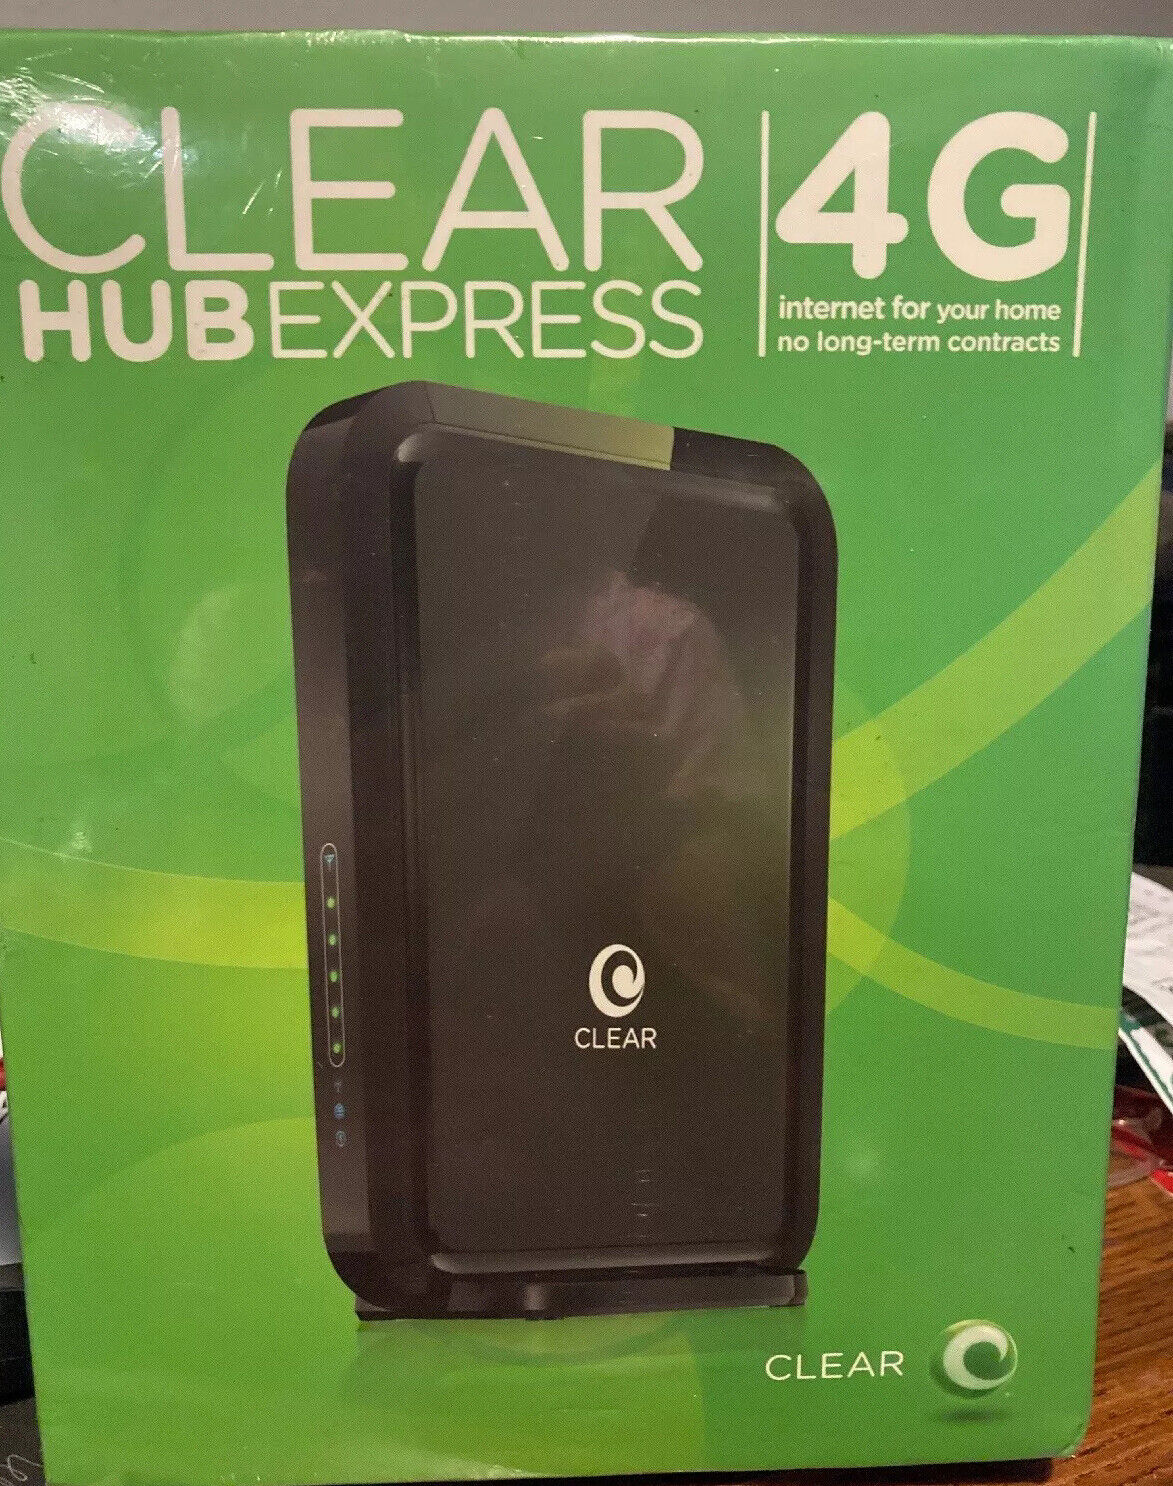 UPGRADE or REPLACE Your CLEAR 4G Modem Clearwire HUB EXPRESS WiFi 